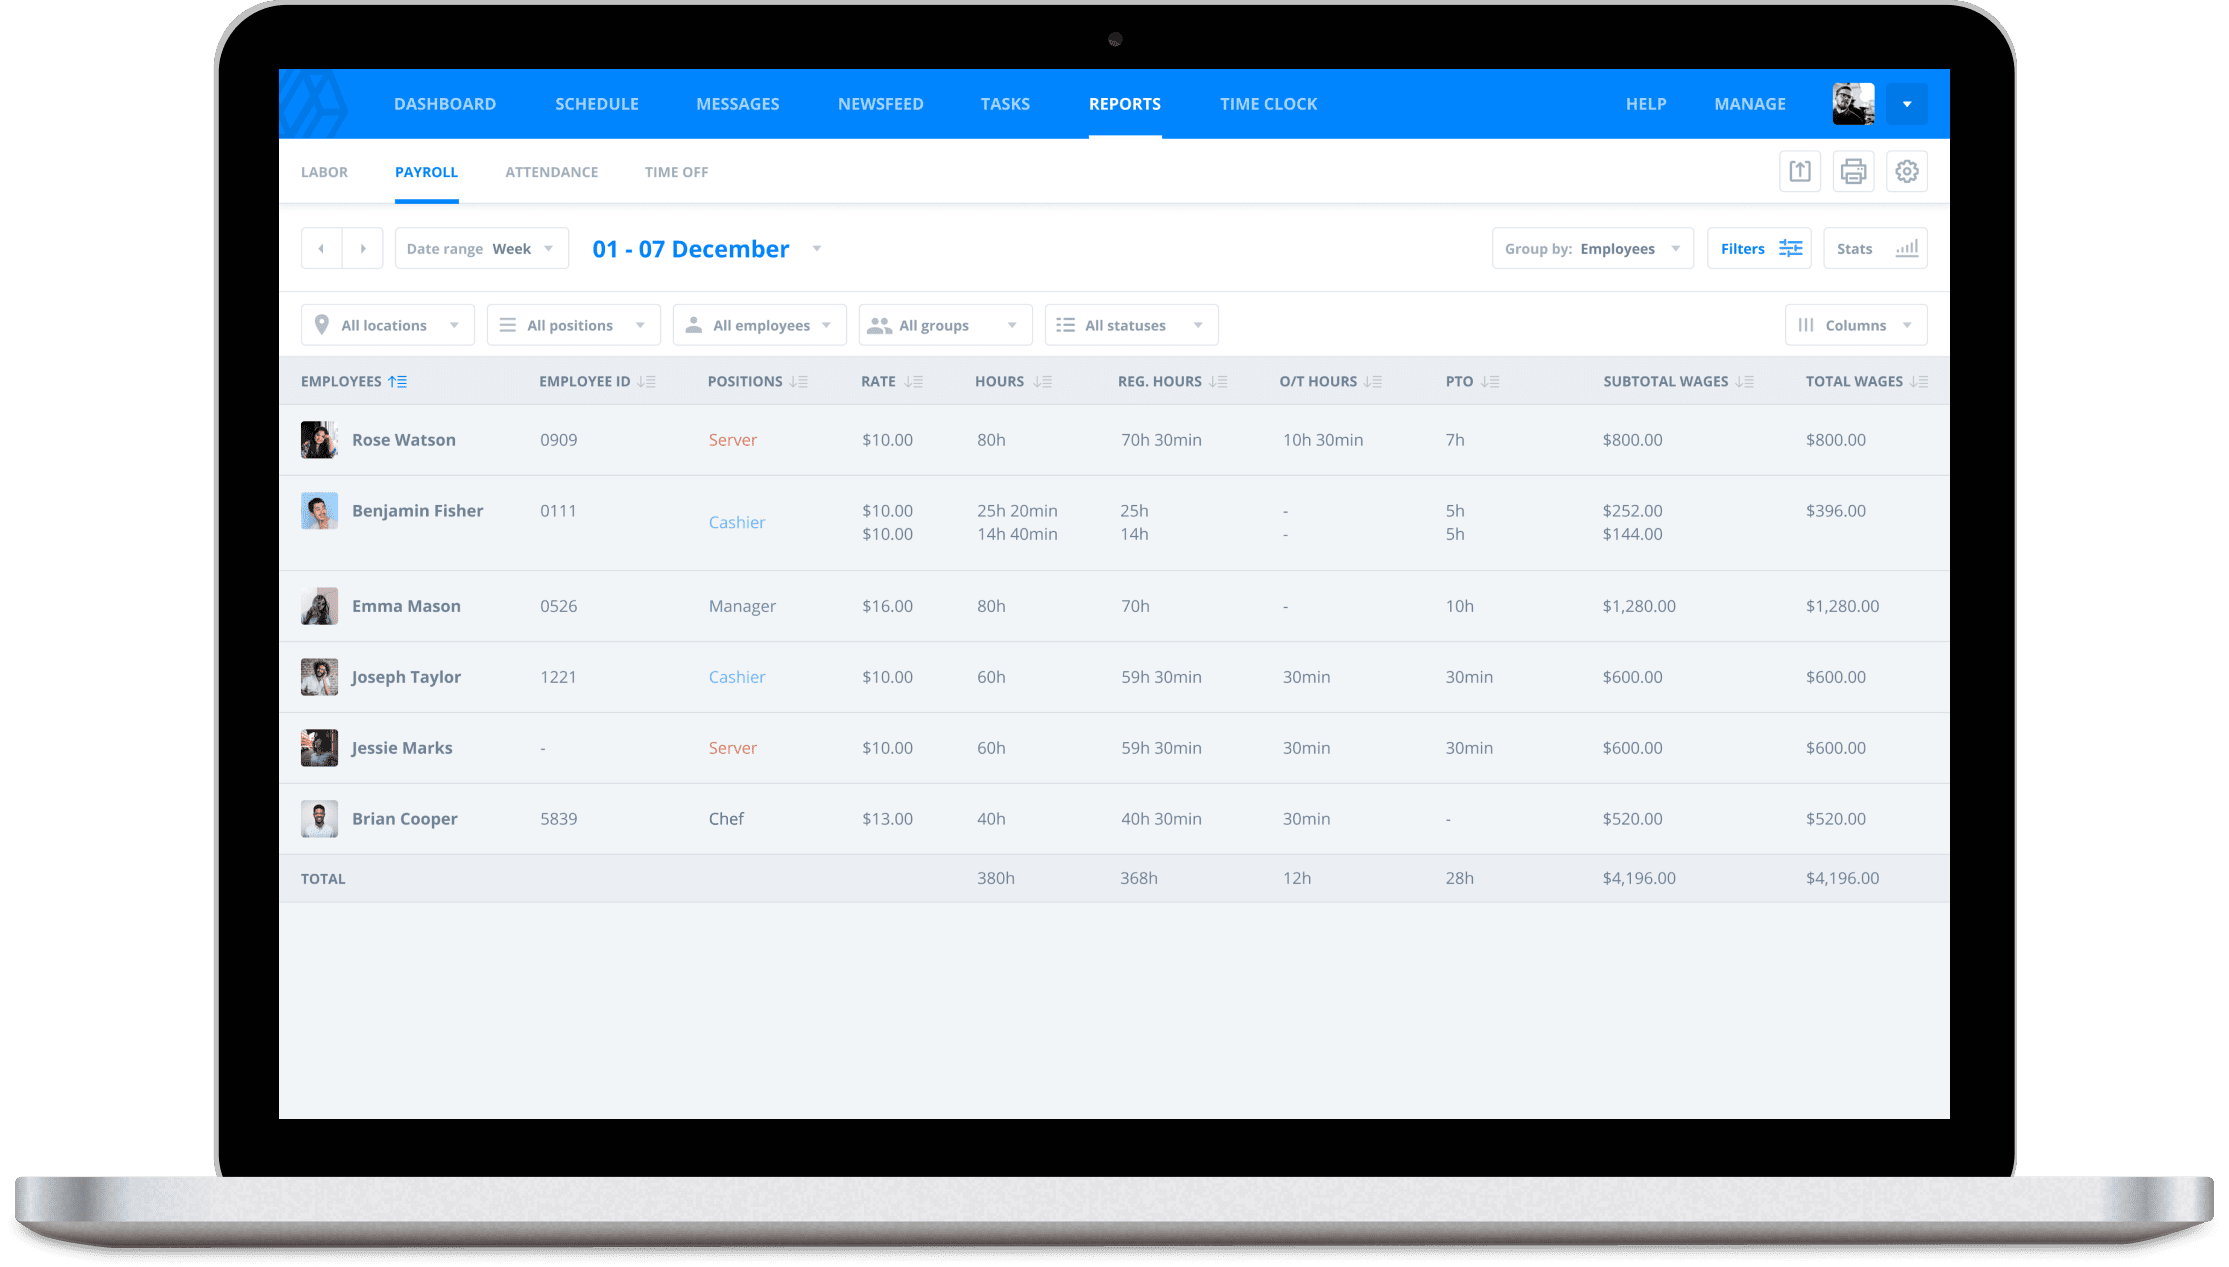 Use Sling's Payroll features to easily manage, report and analyze payroll and labor costs, and sync or export to your preferred payroll processor.